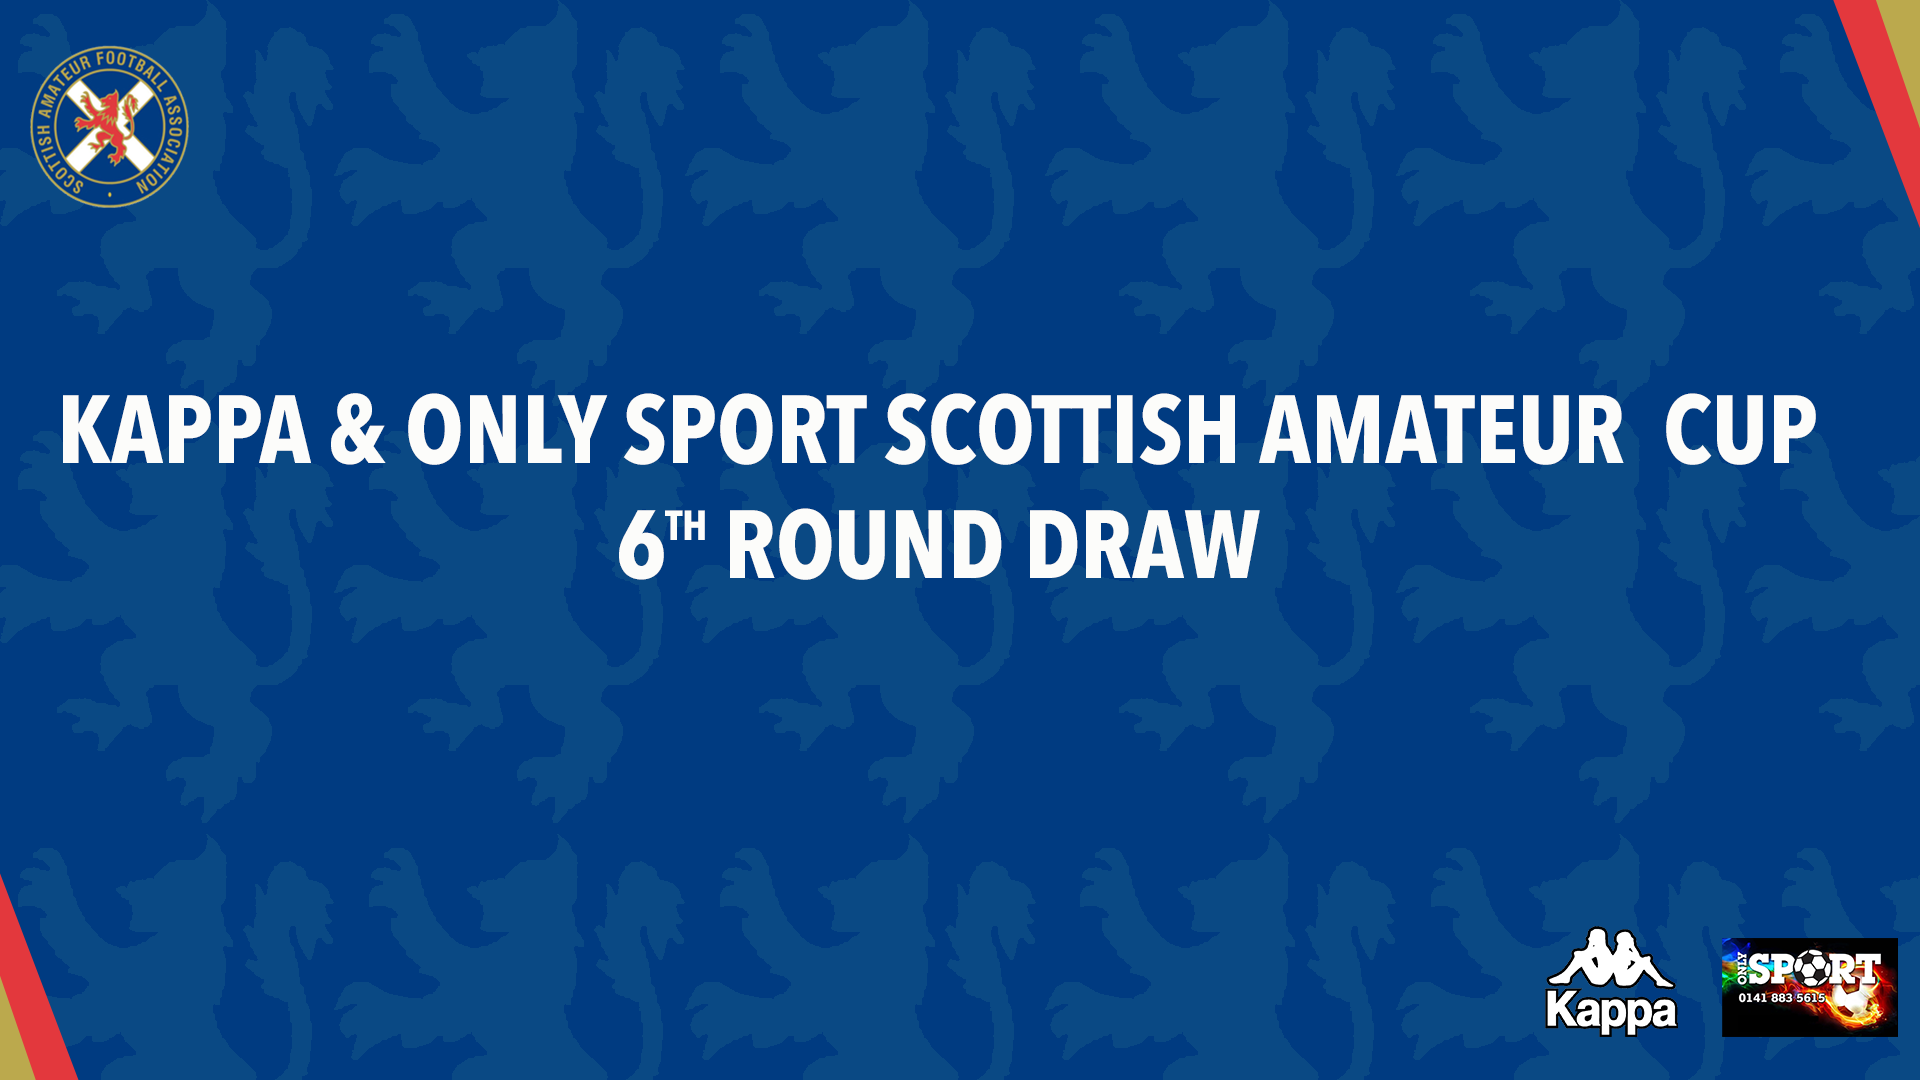 Kappa & Only Sport Scottish Amateur Cup 6th Round Draw